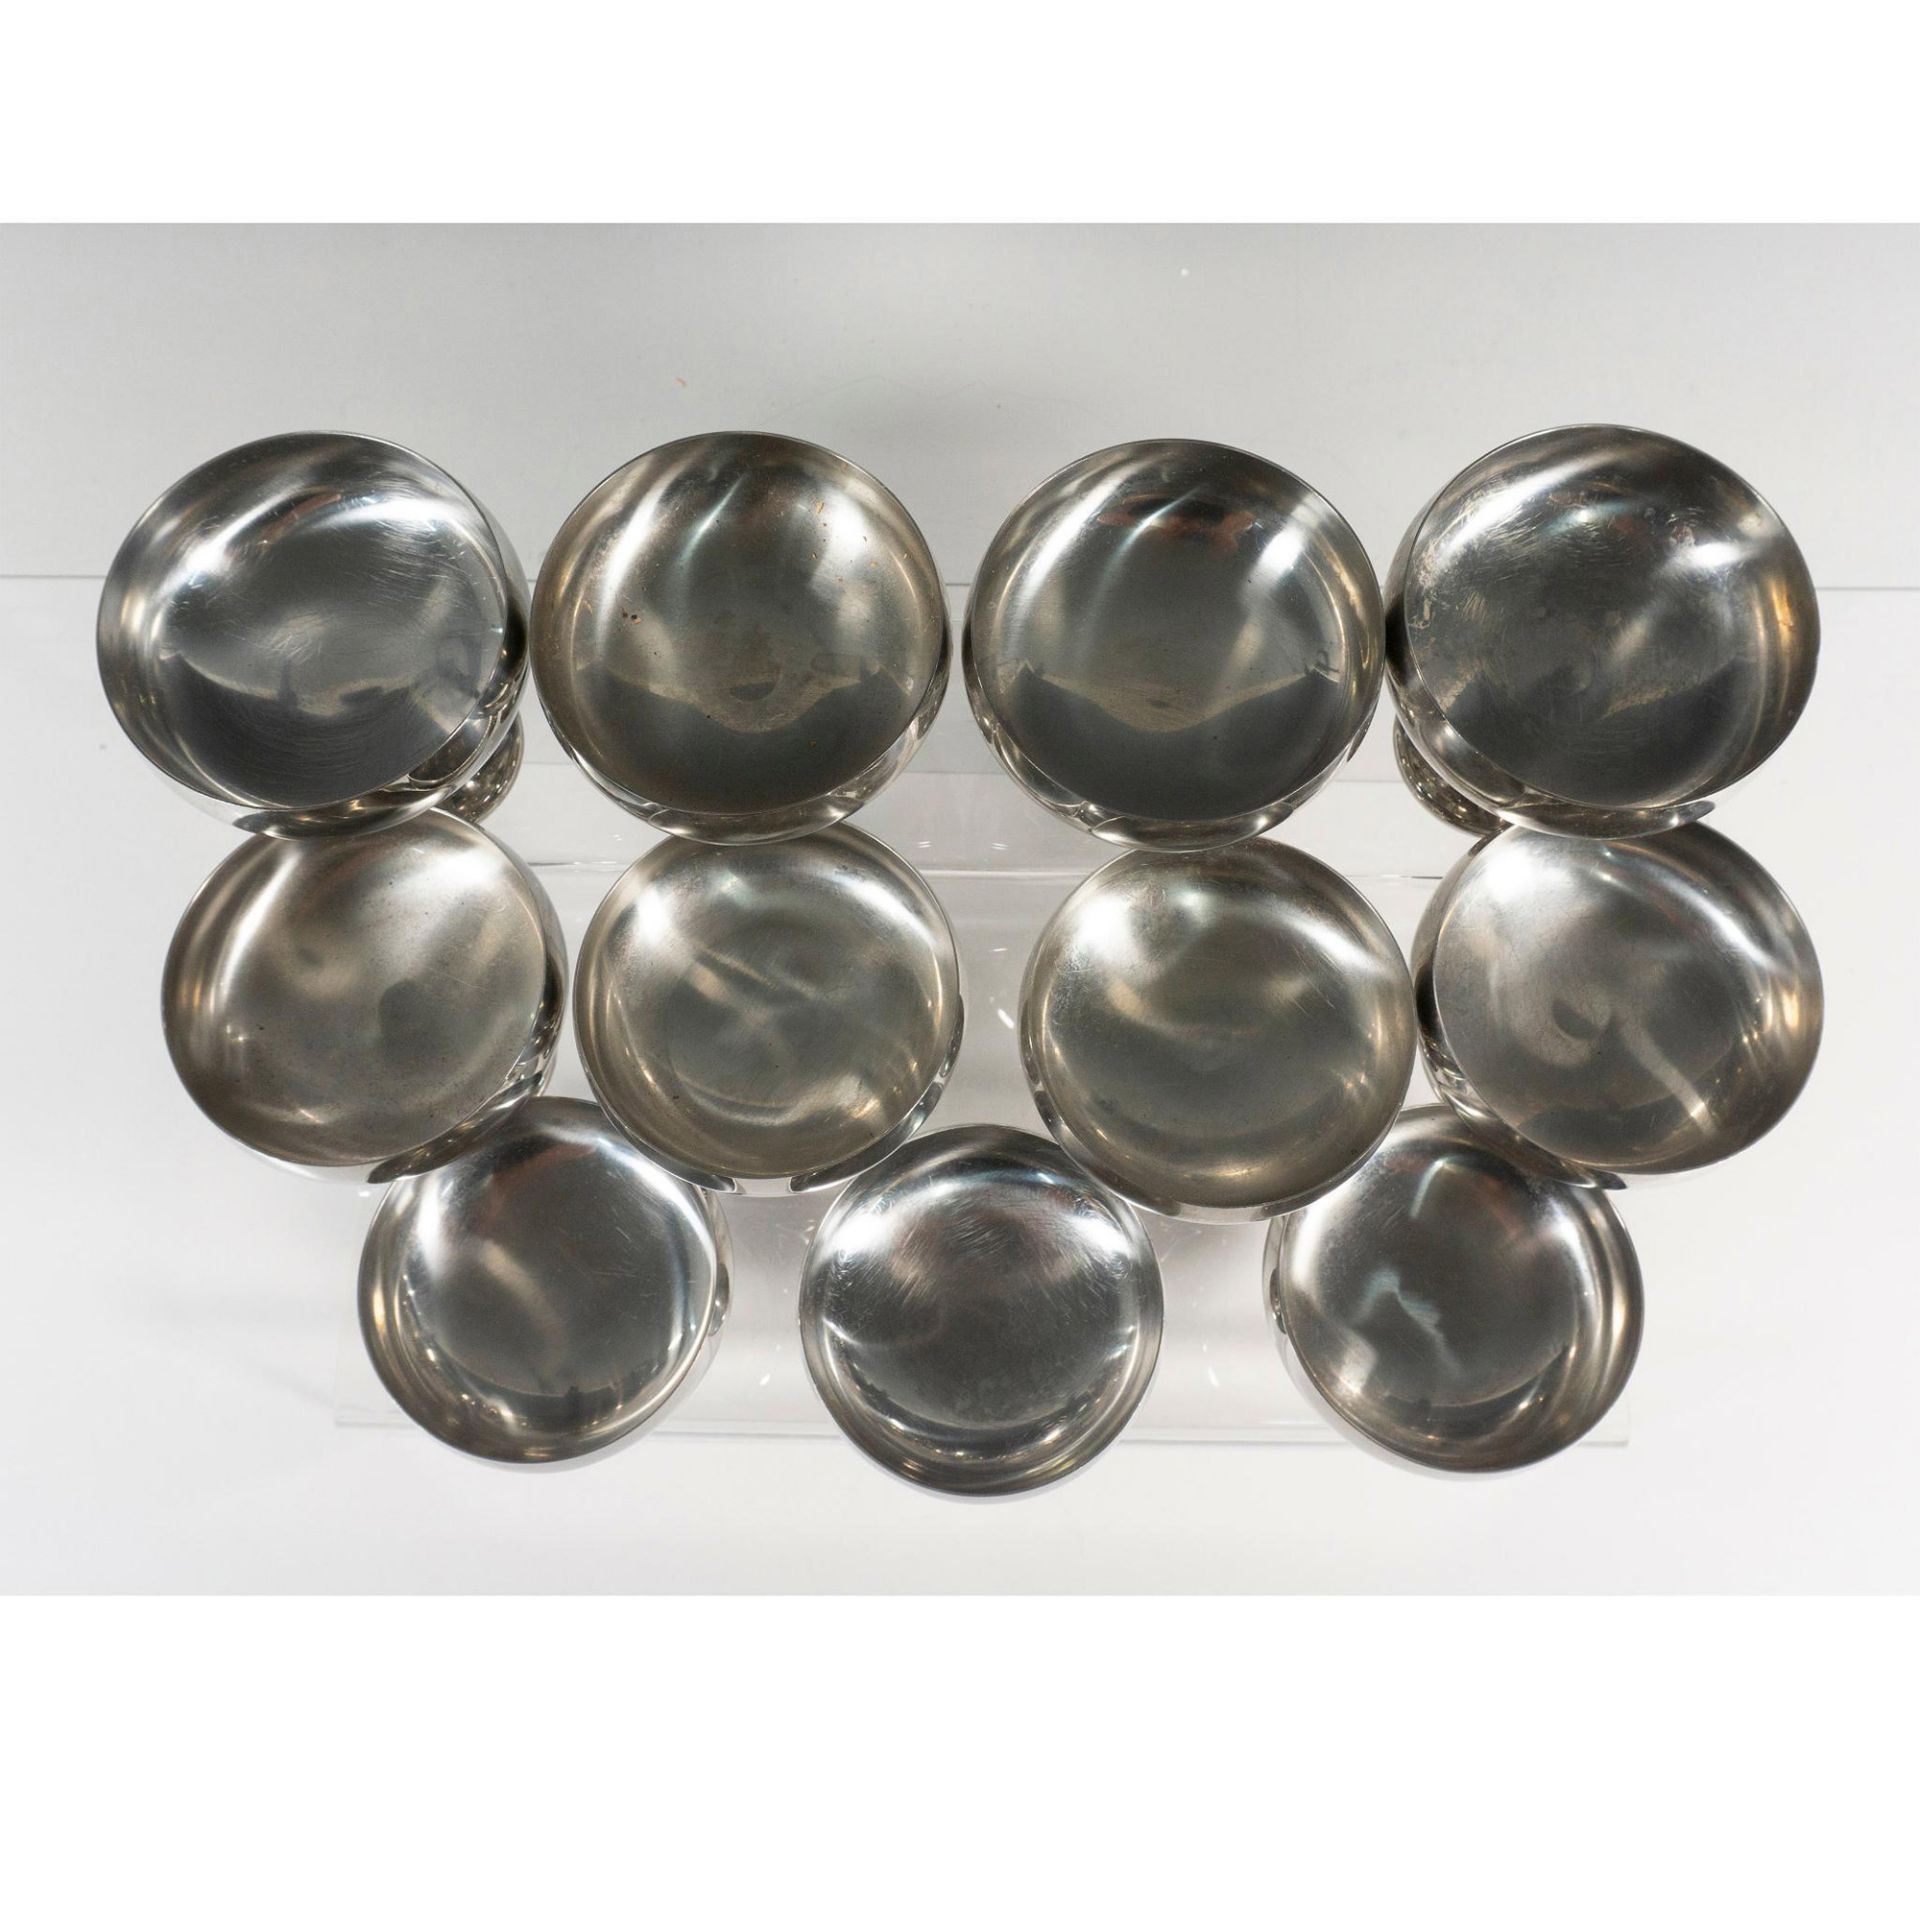 11pc Vintage Italian Stainless Steel Sorbet Bowls - Image 3 of 5